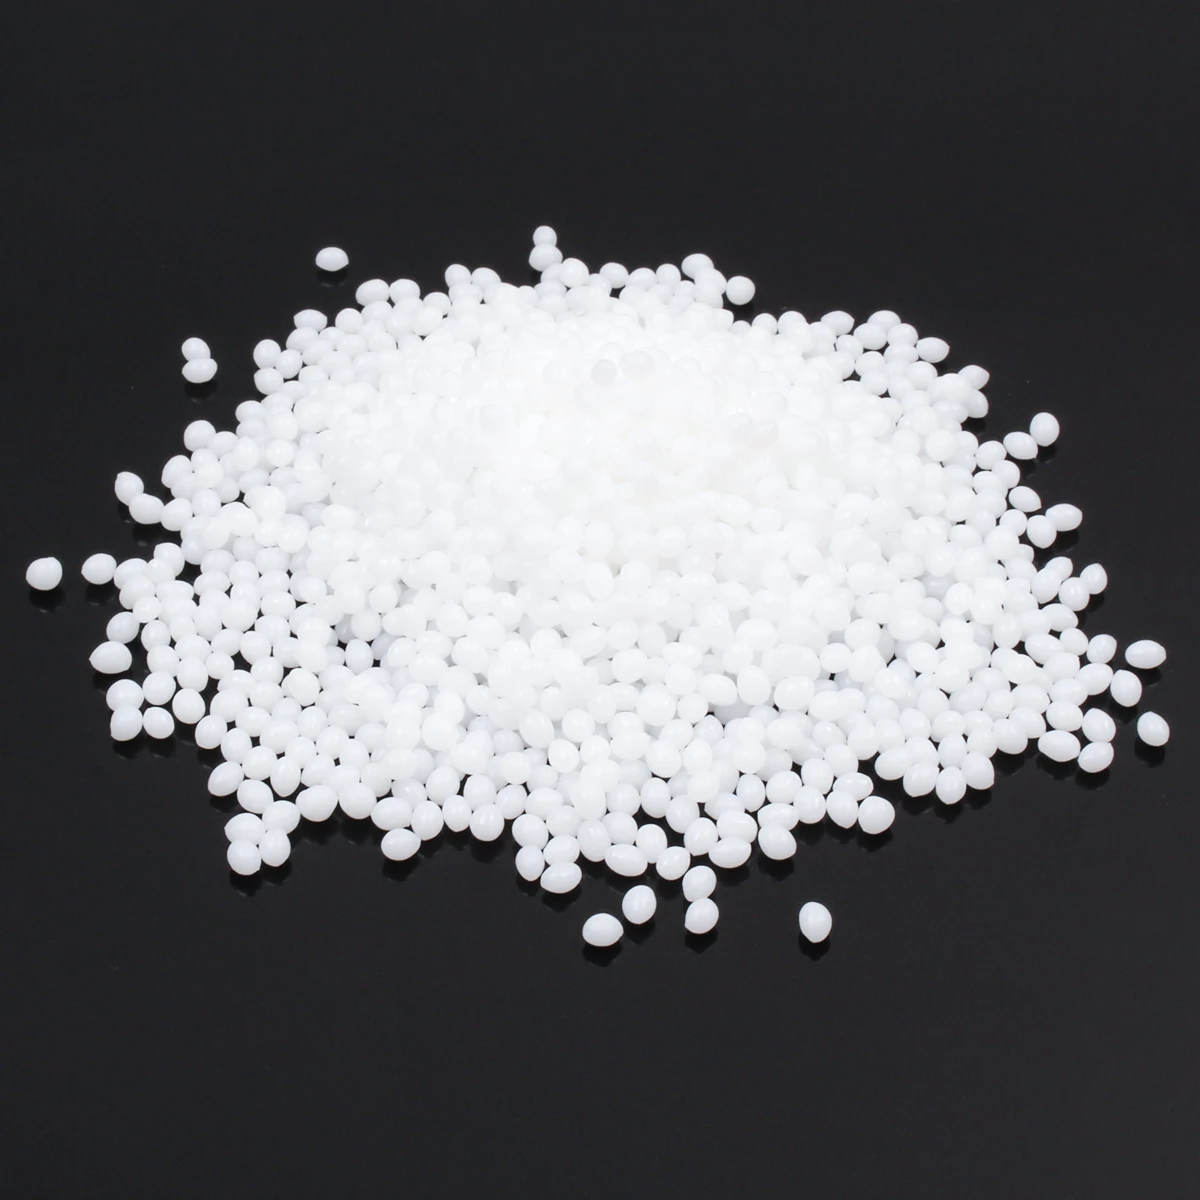 50g/Pack  DIY Polymorph Thermoplastic PCL Plastic Moldable Pellet Friendly Bead